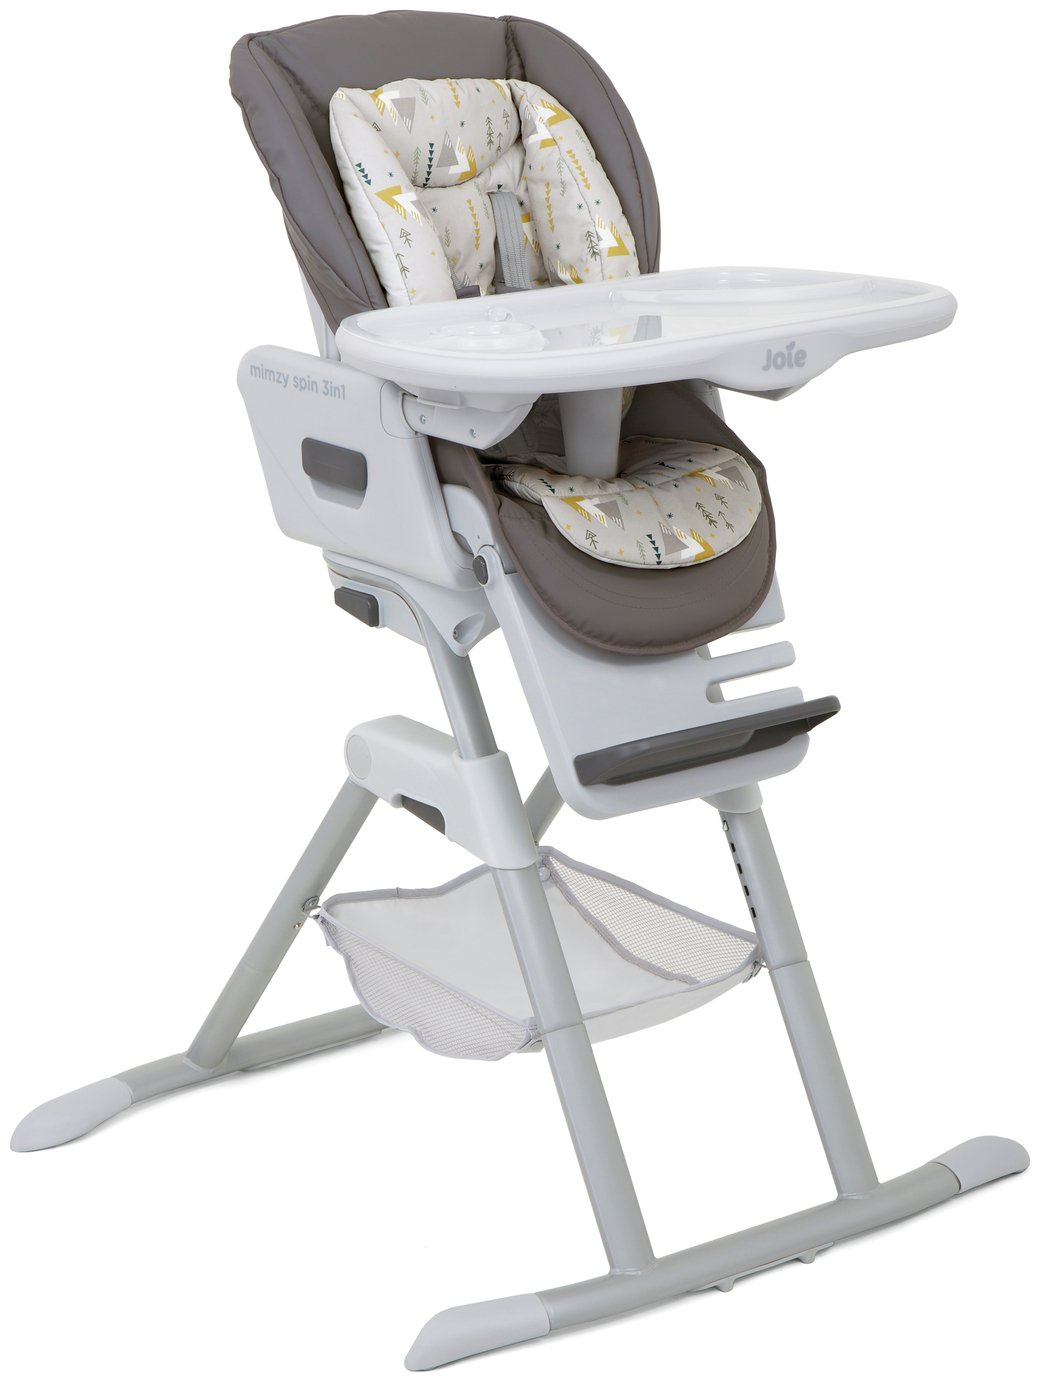 Joie Mimzy 3-in-1 Highchair Review